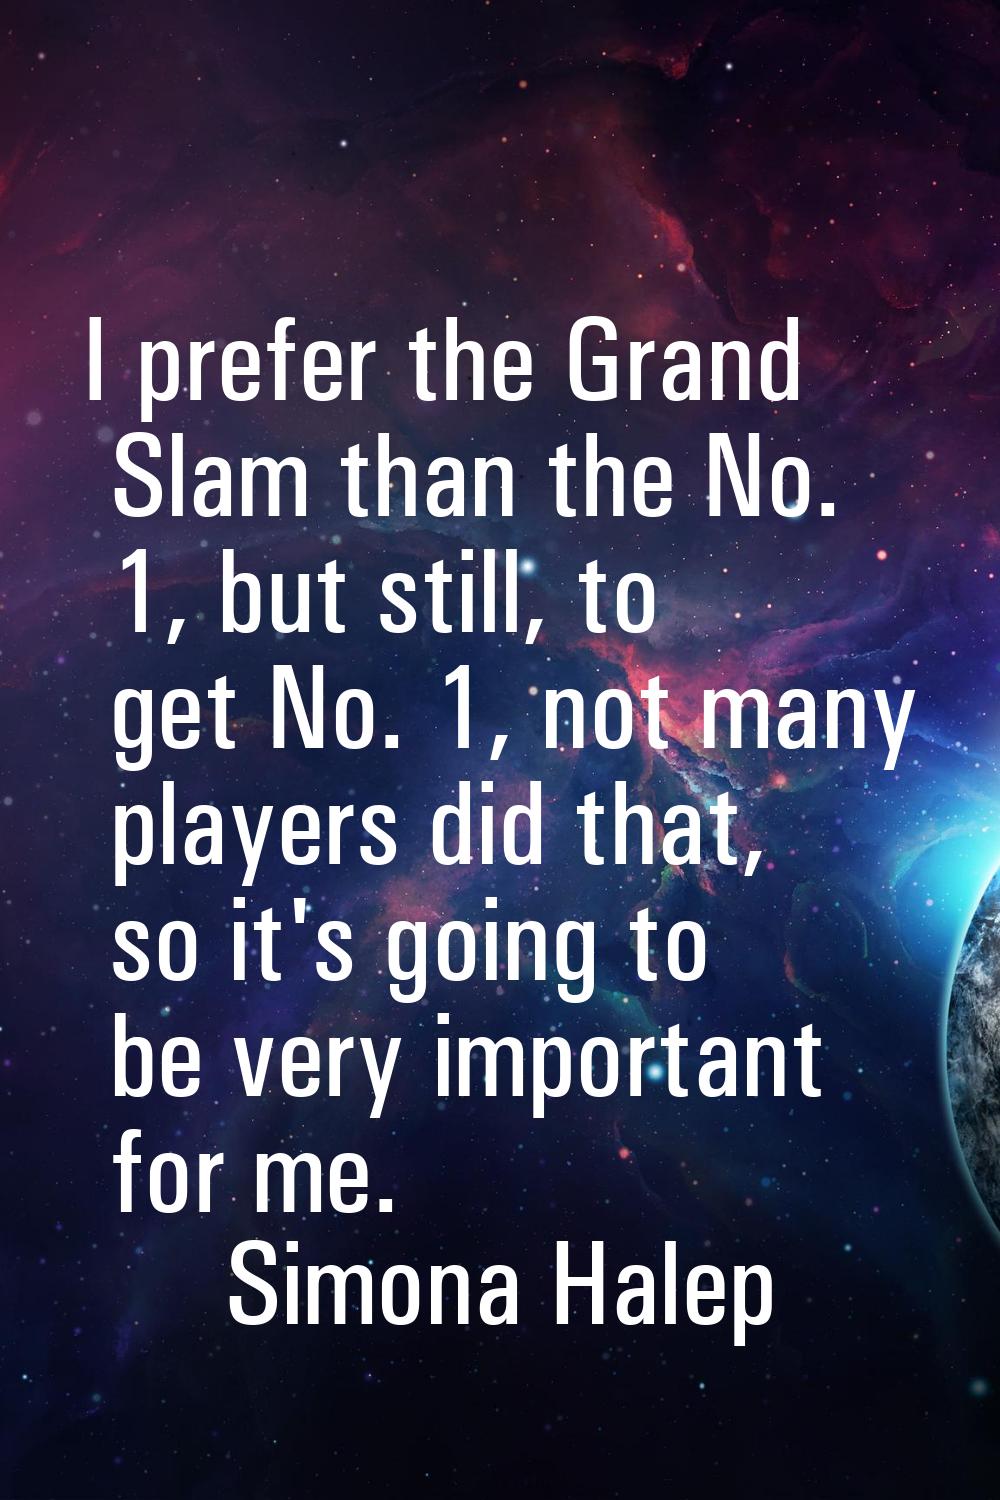 I prefer the Grand Slam than the No. 1, but still, to get No. 1, not many players did that, so it's